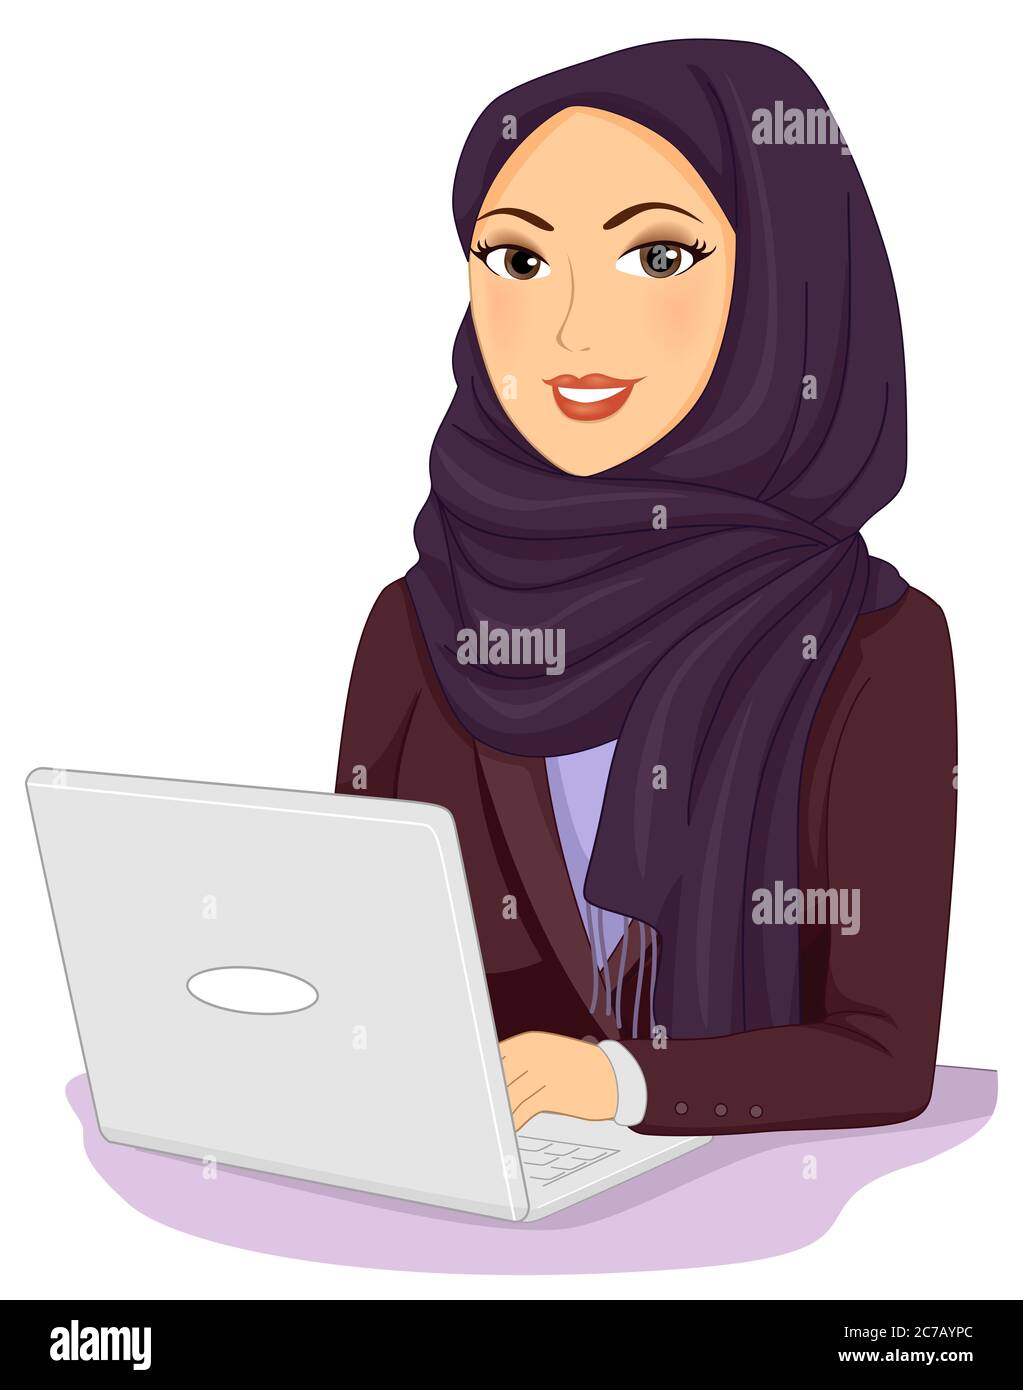 Illustration of a Girl Wearing Hijab and Business Attire Using Laptop Stock Photo